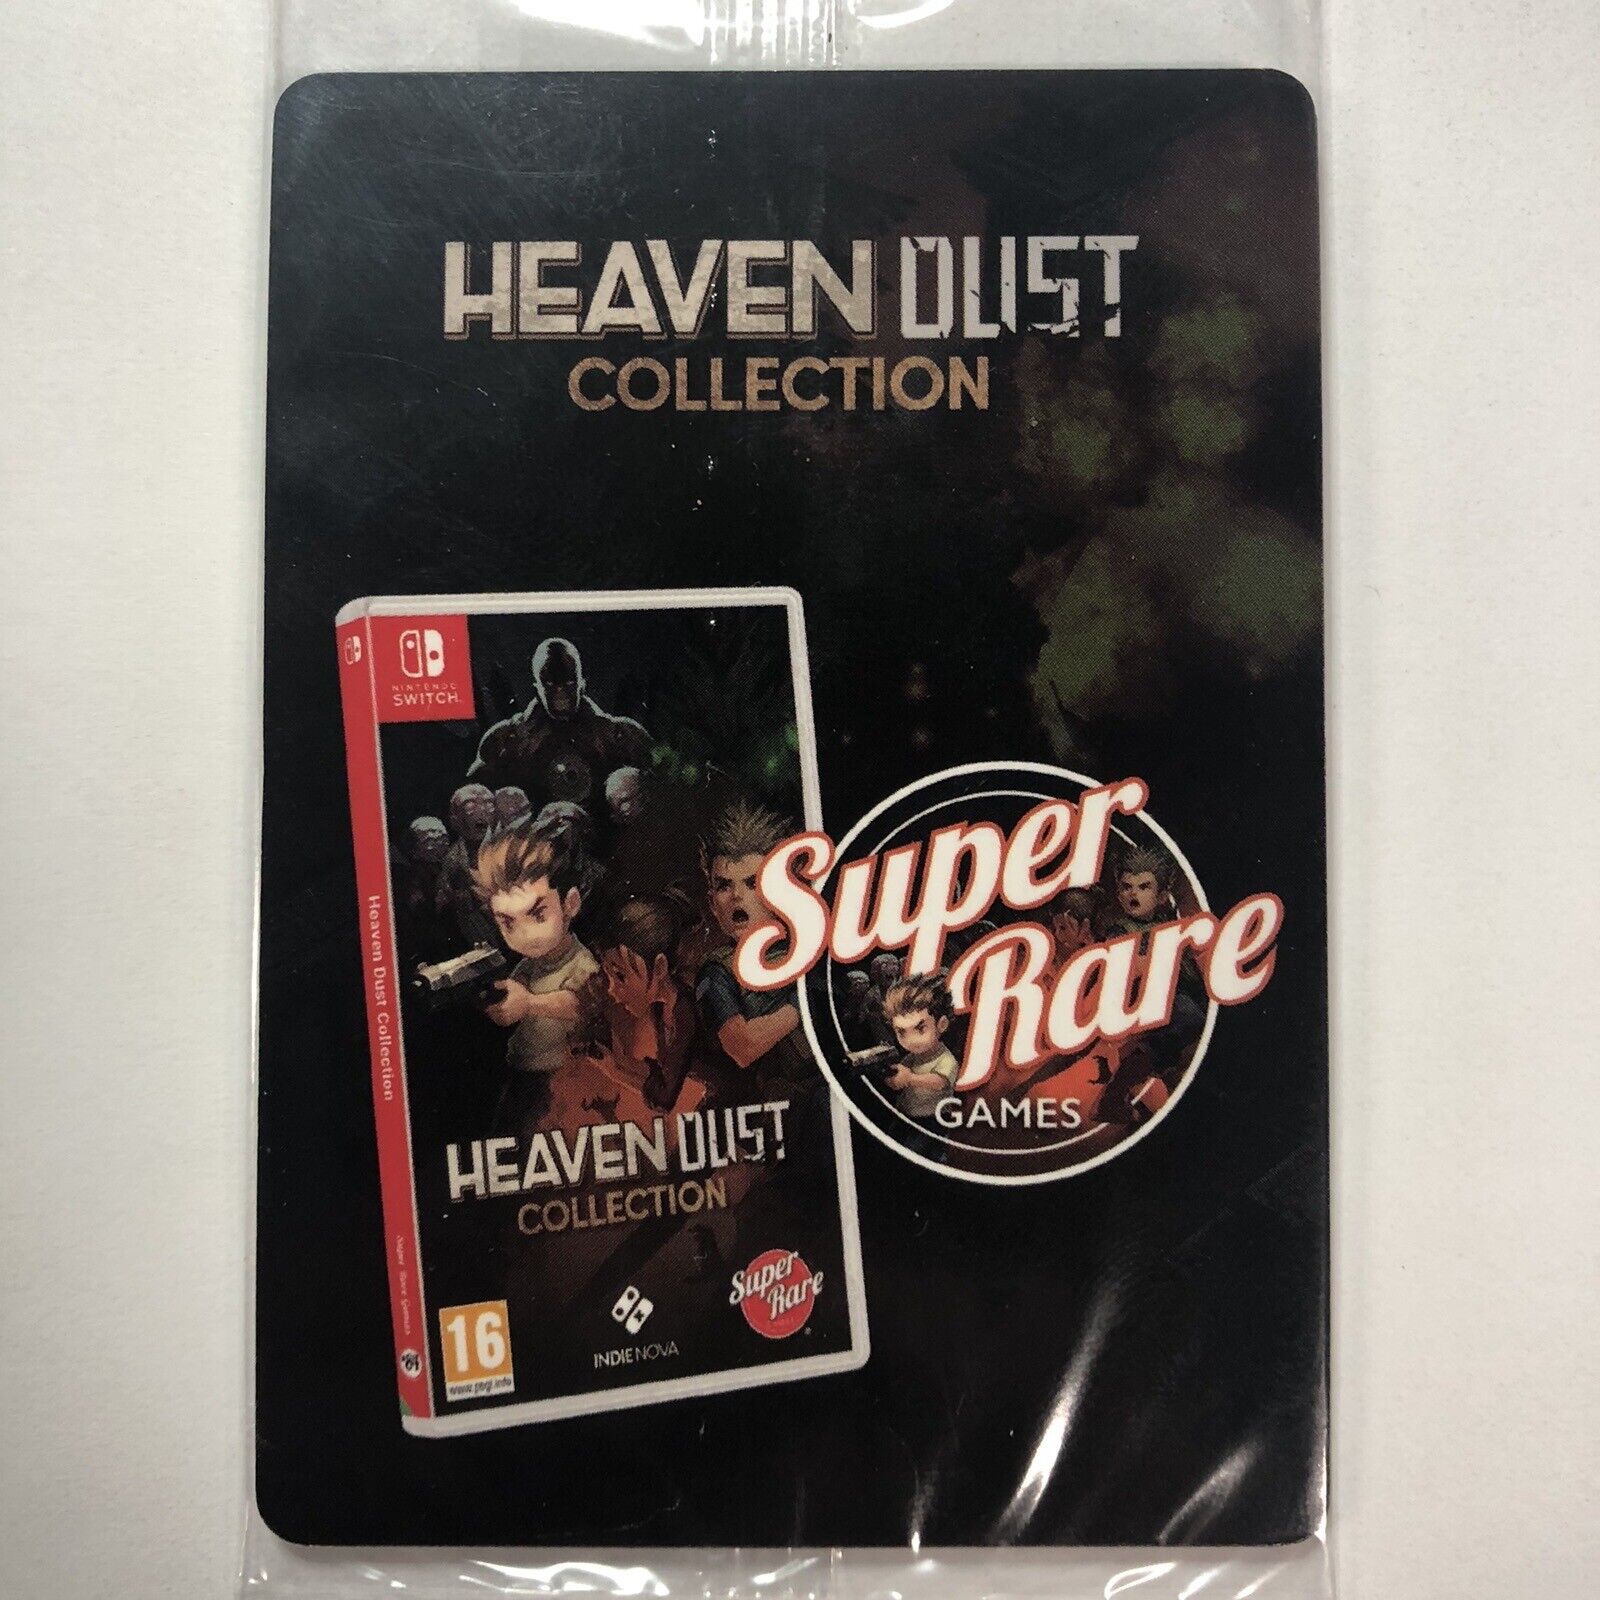 Heaven Dust Collection Video Game Sealed Trading Card Pack Super Rare Games SRG